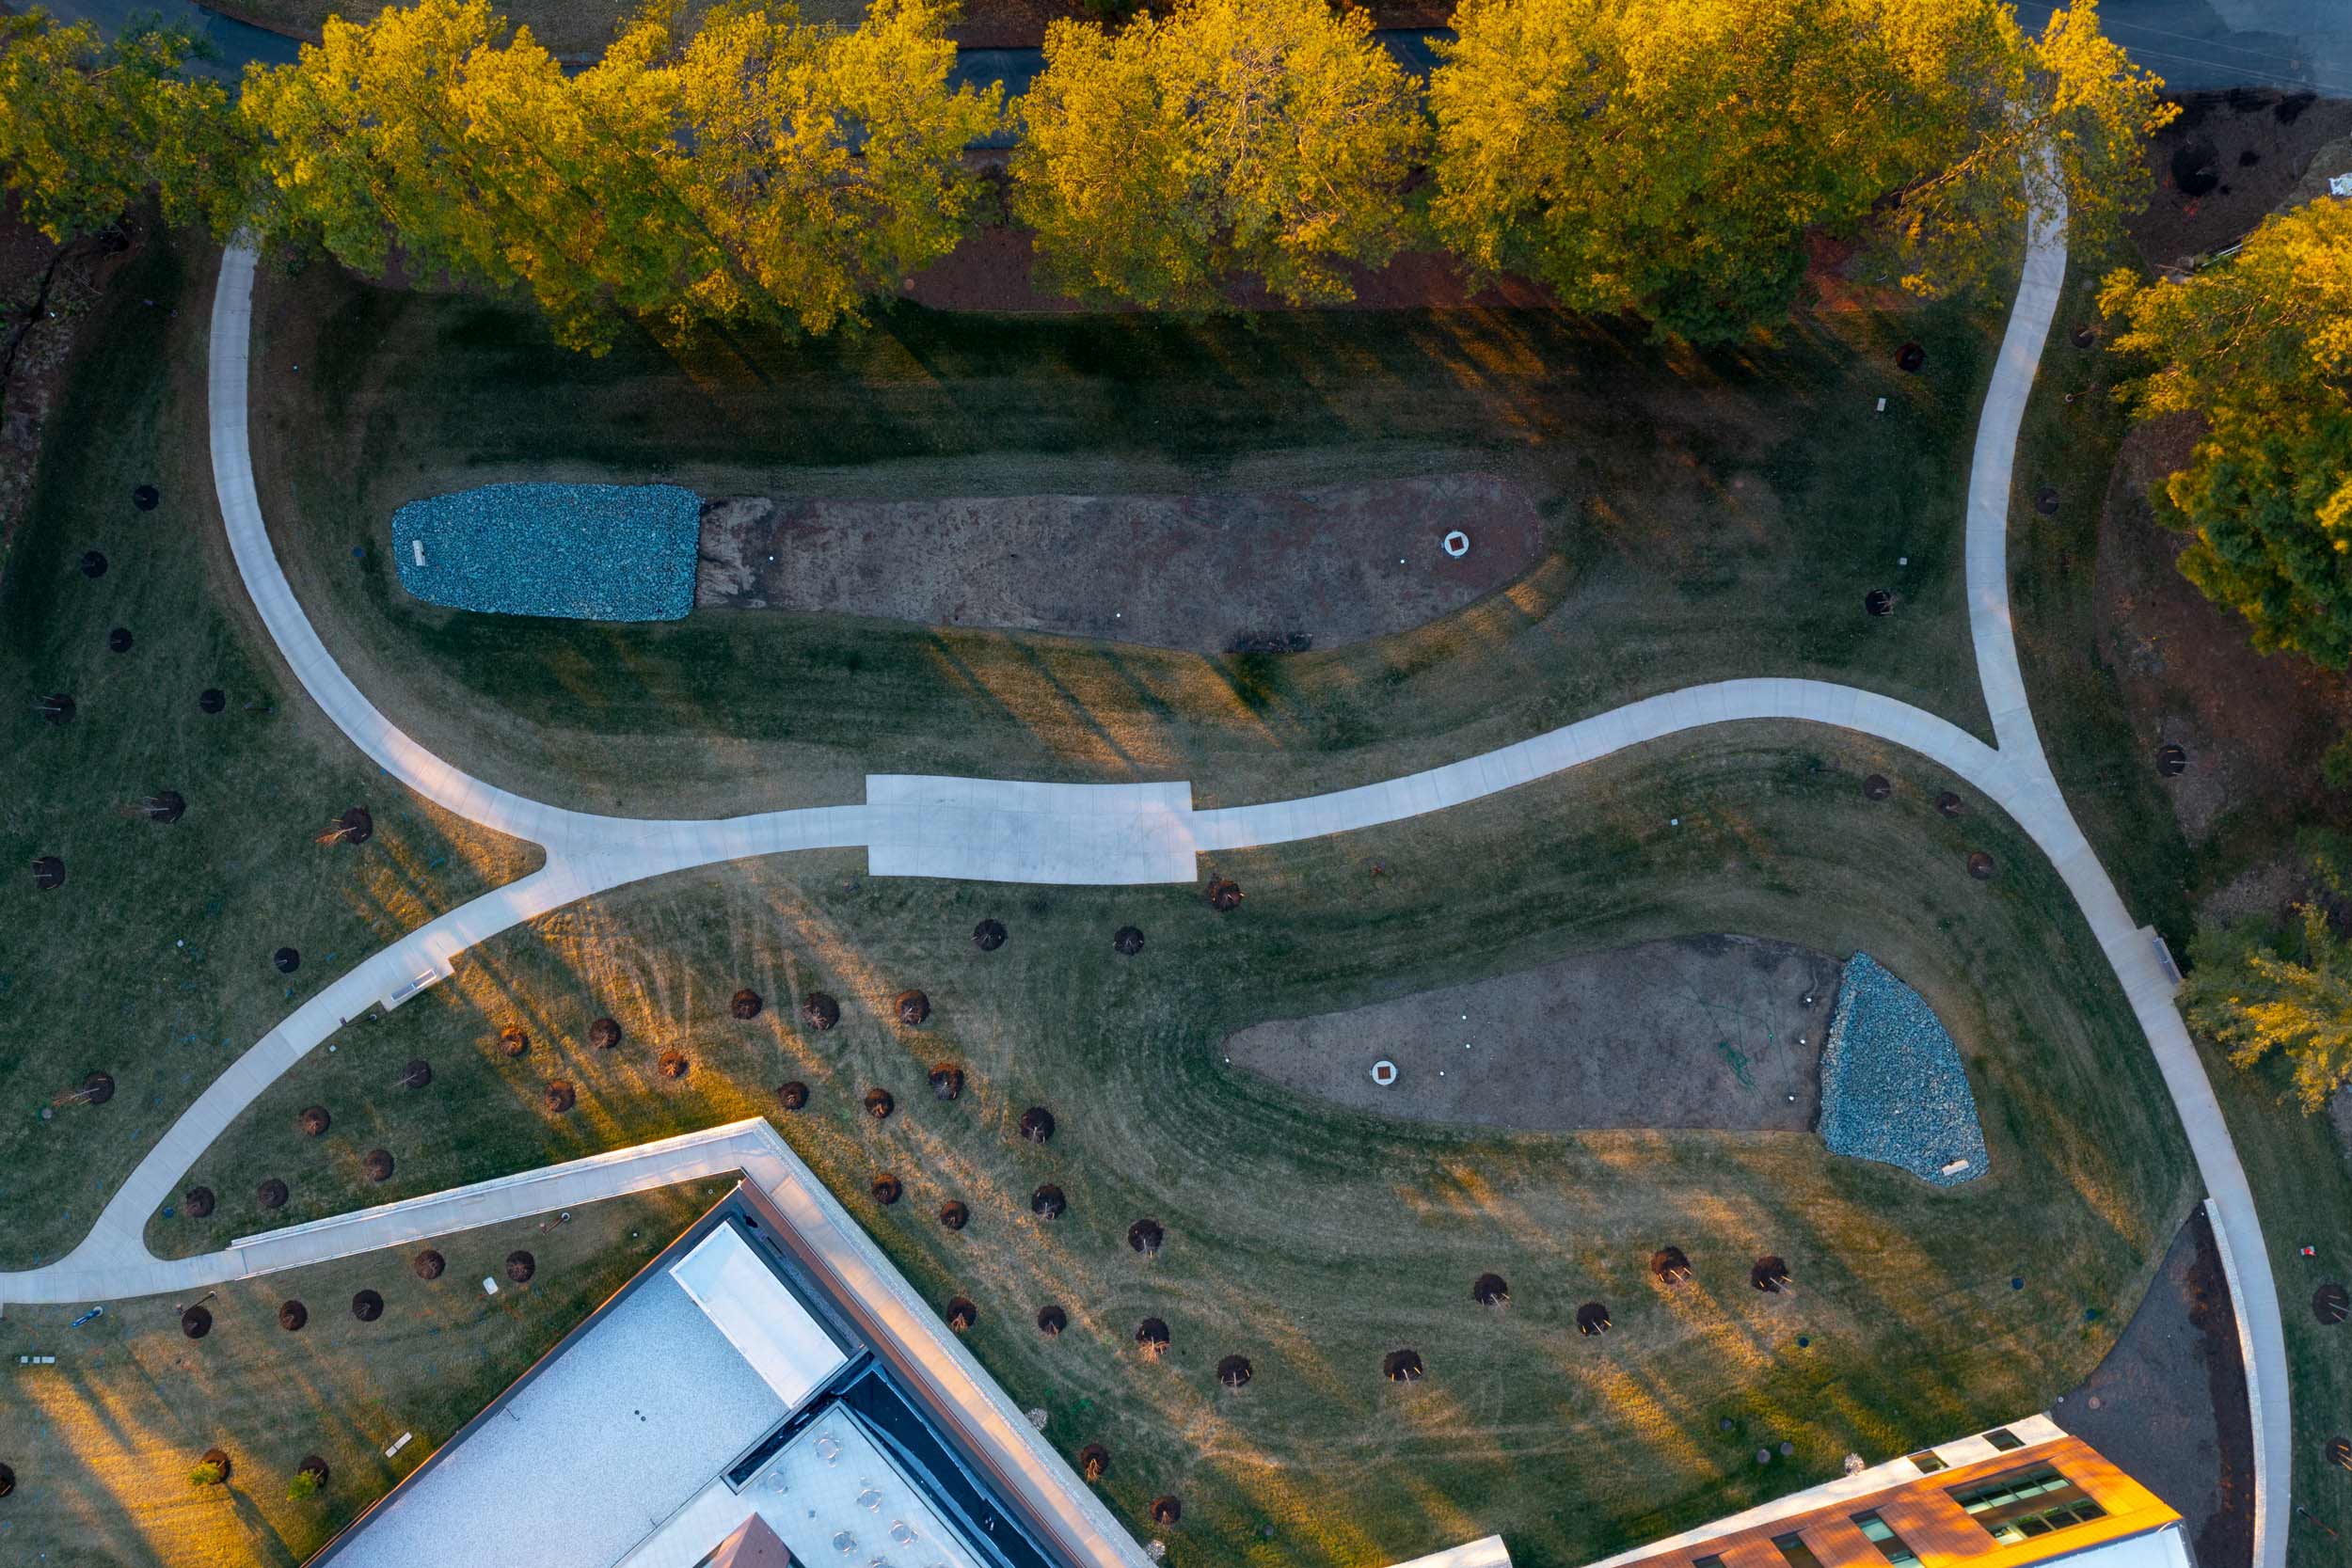 Photo of the walking trails by the new Orthopedics Center.